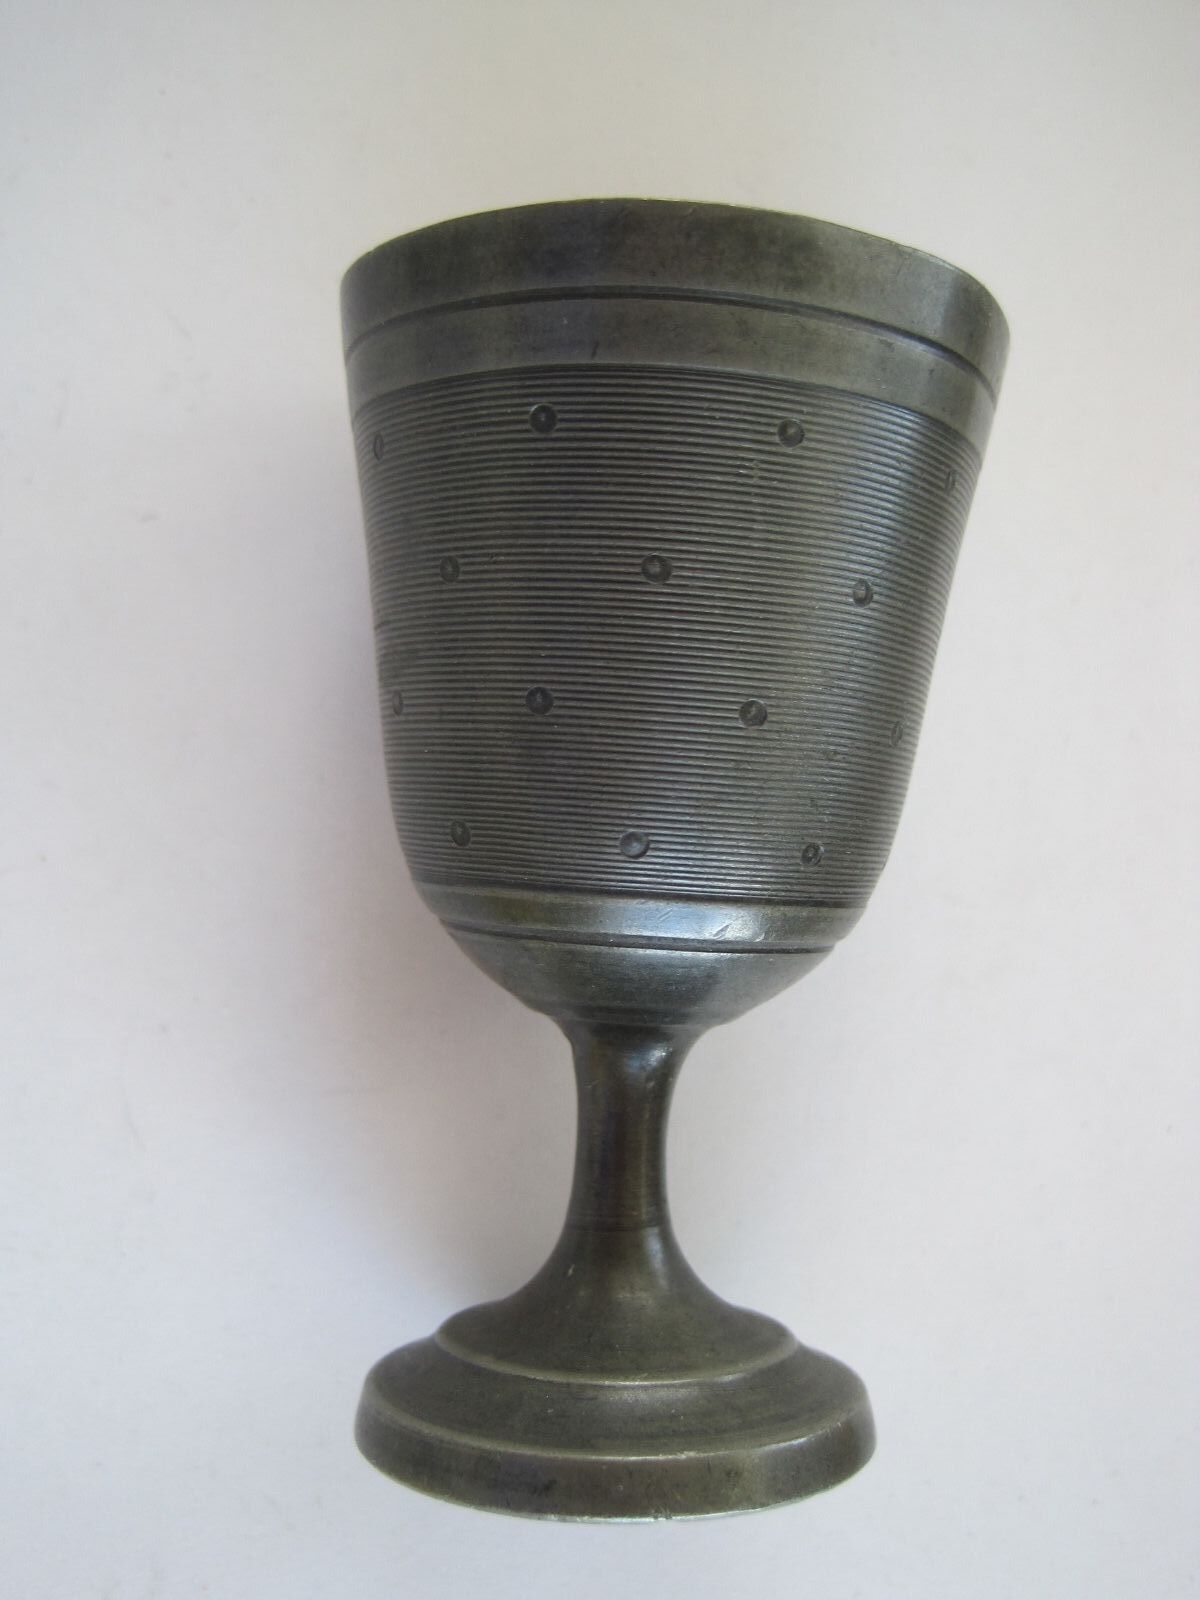 Christening Chalice or Pewter Unmarked Little Goblet 3\